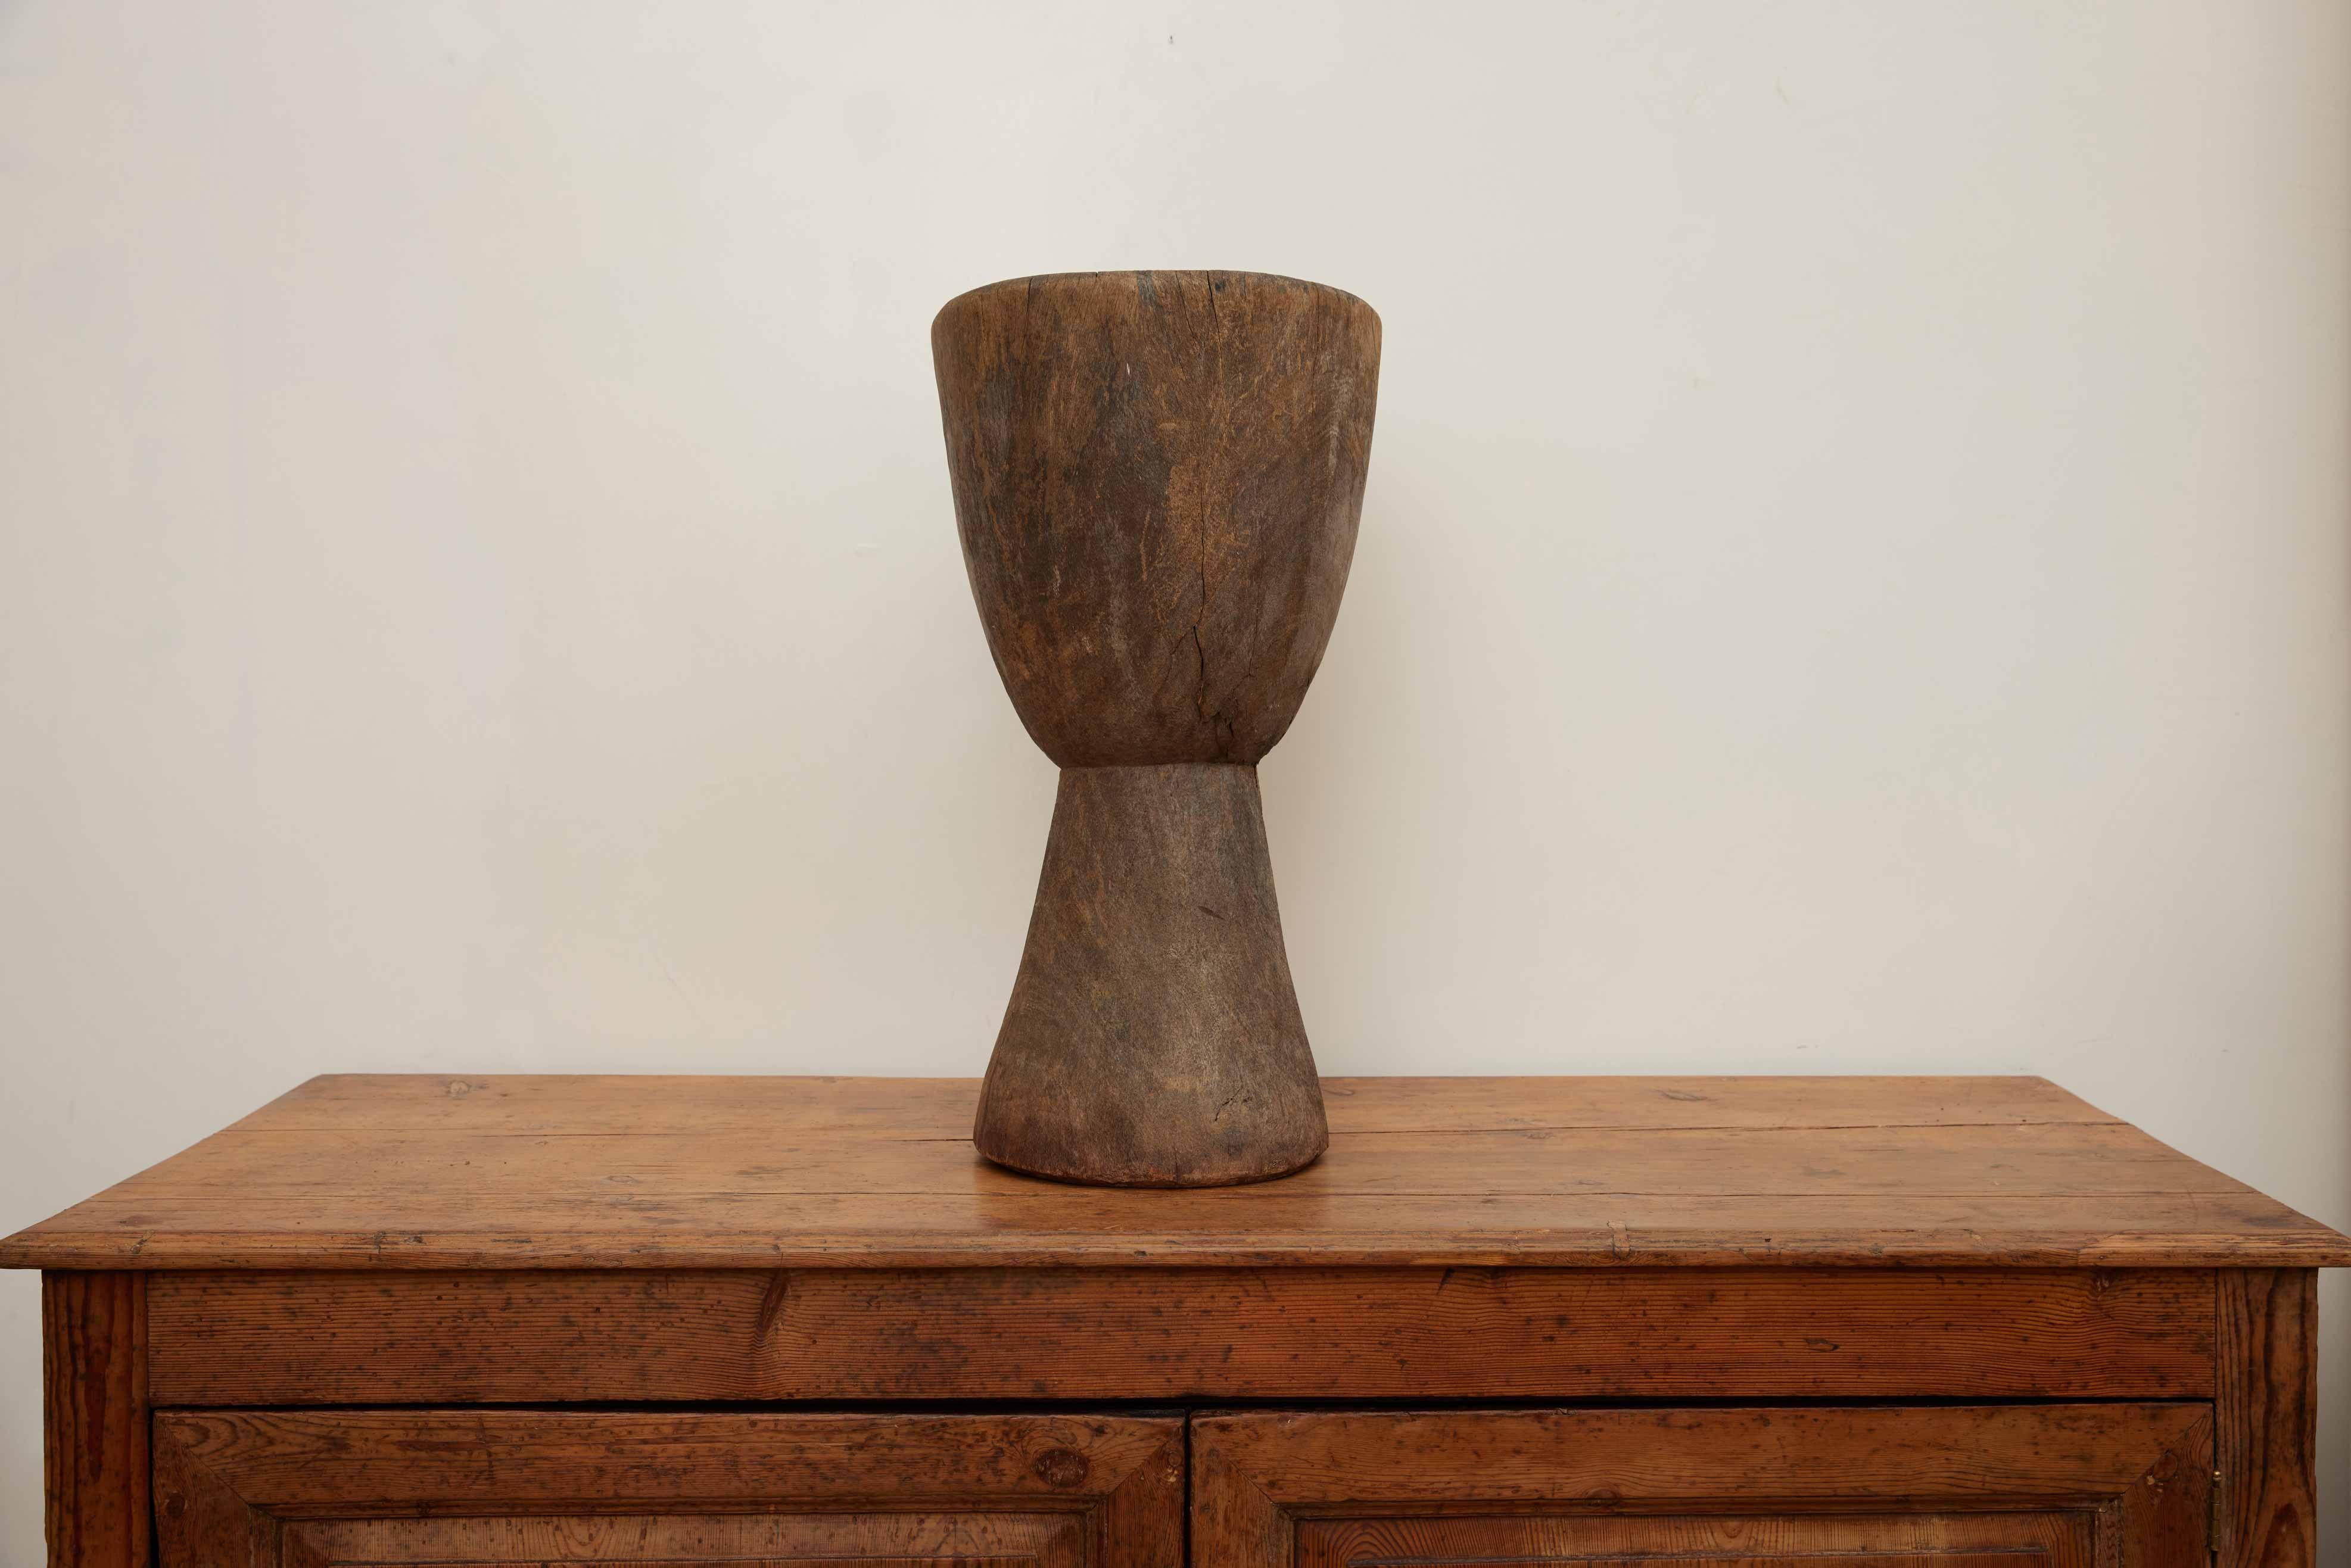  Large 19th Century European Wood Mortar For Sale 6